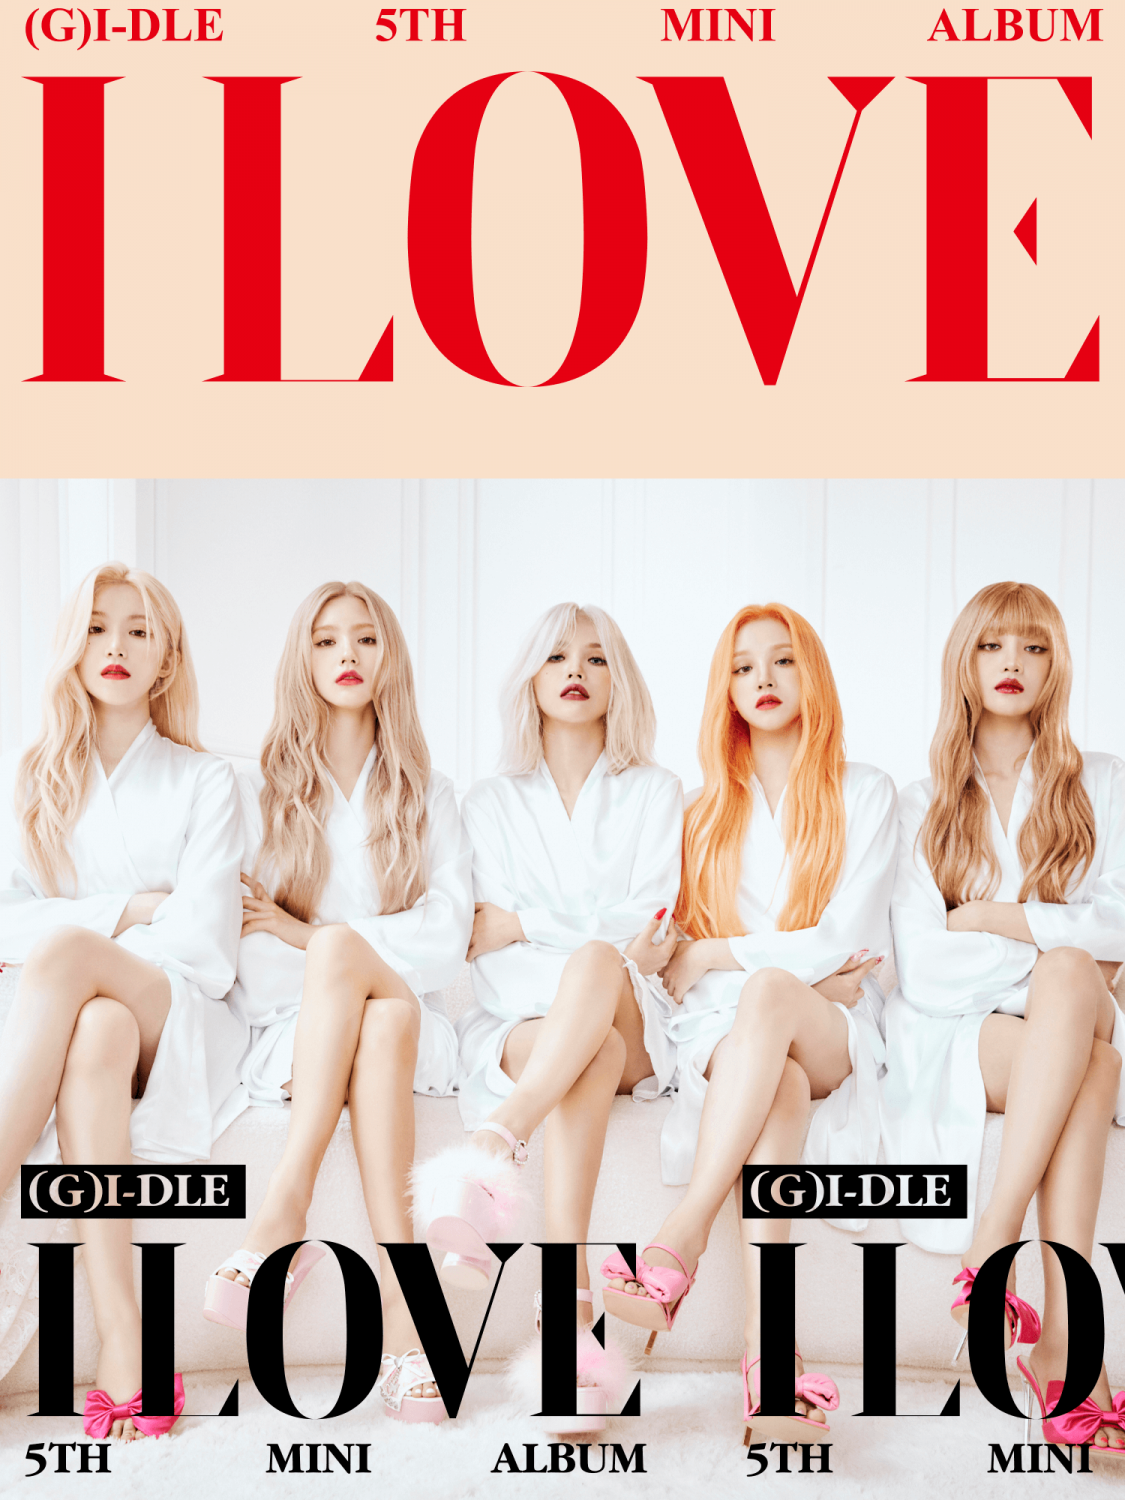 'Comeback' (G)I-DLE "An album full of love... The conclusion is 'Let's love me'"